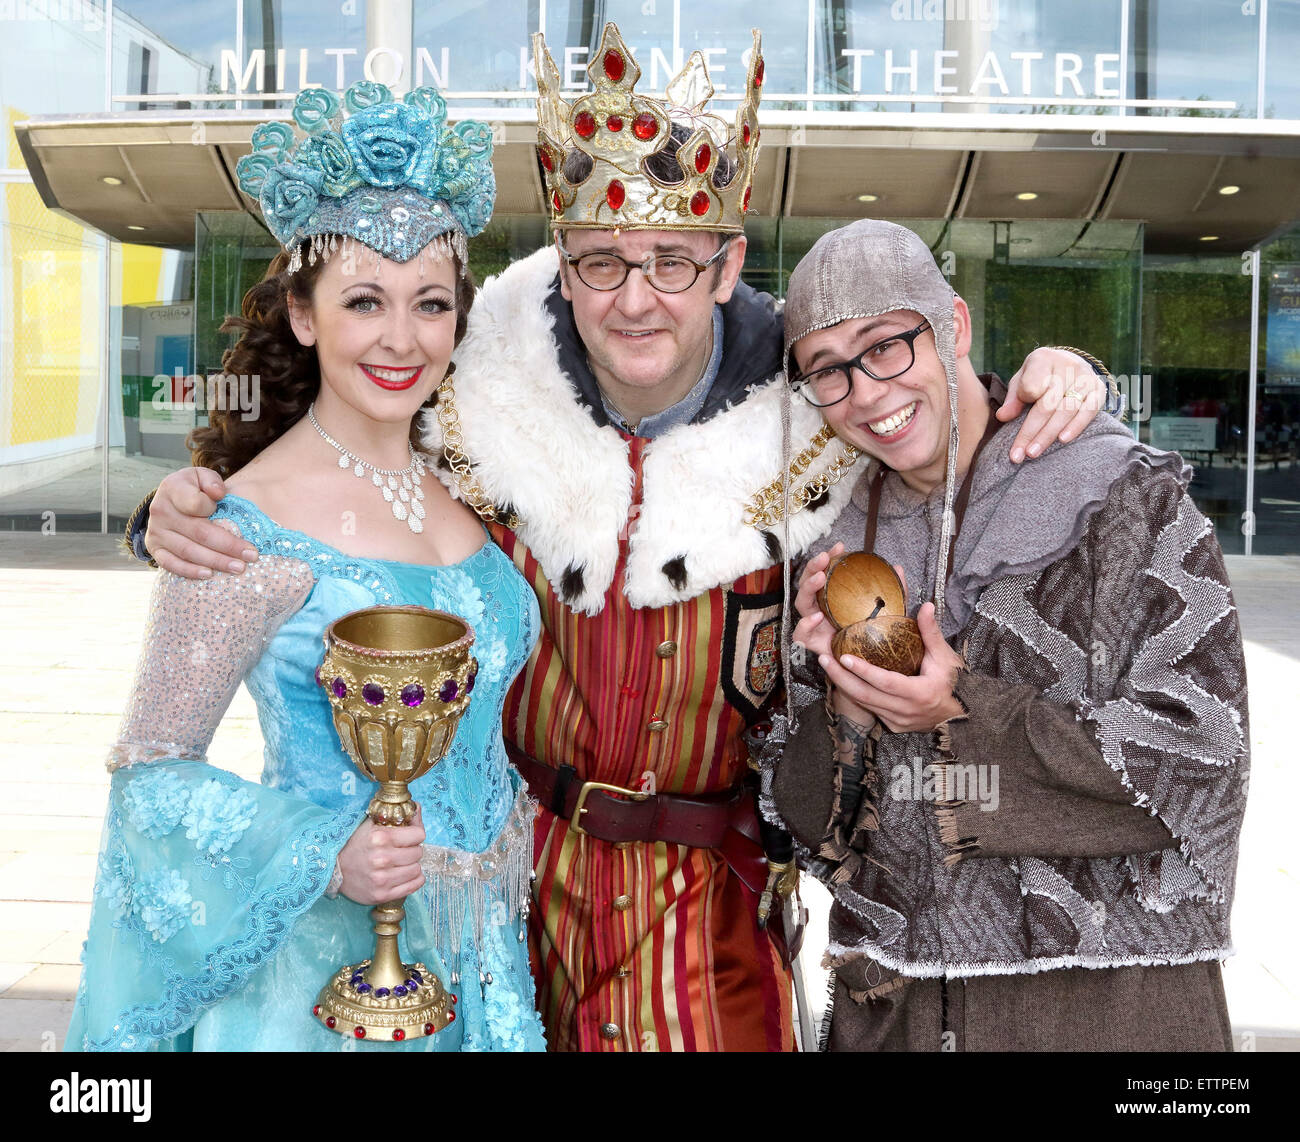 Spamalot Cast Photocall outside Milton Keynes Theatre as they start of